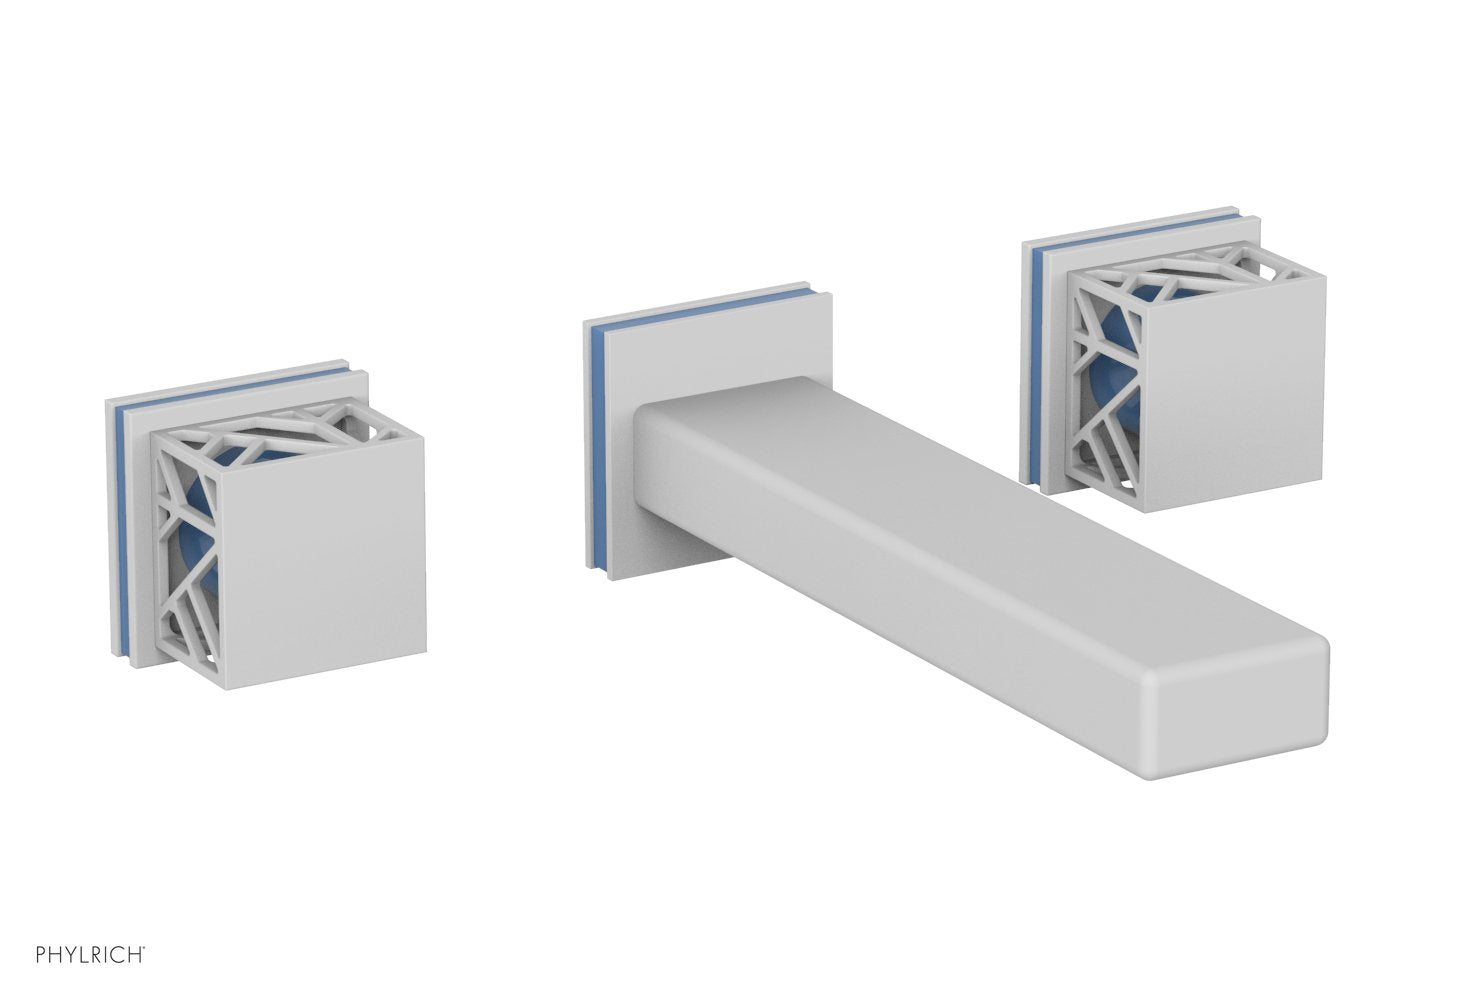 Phylrich JOLIE Wall Lavatory Set - Square Handles with "Light Blue" Accents